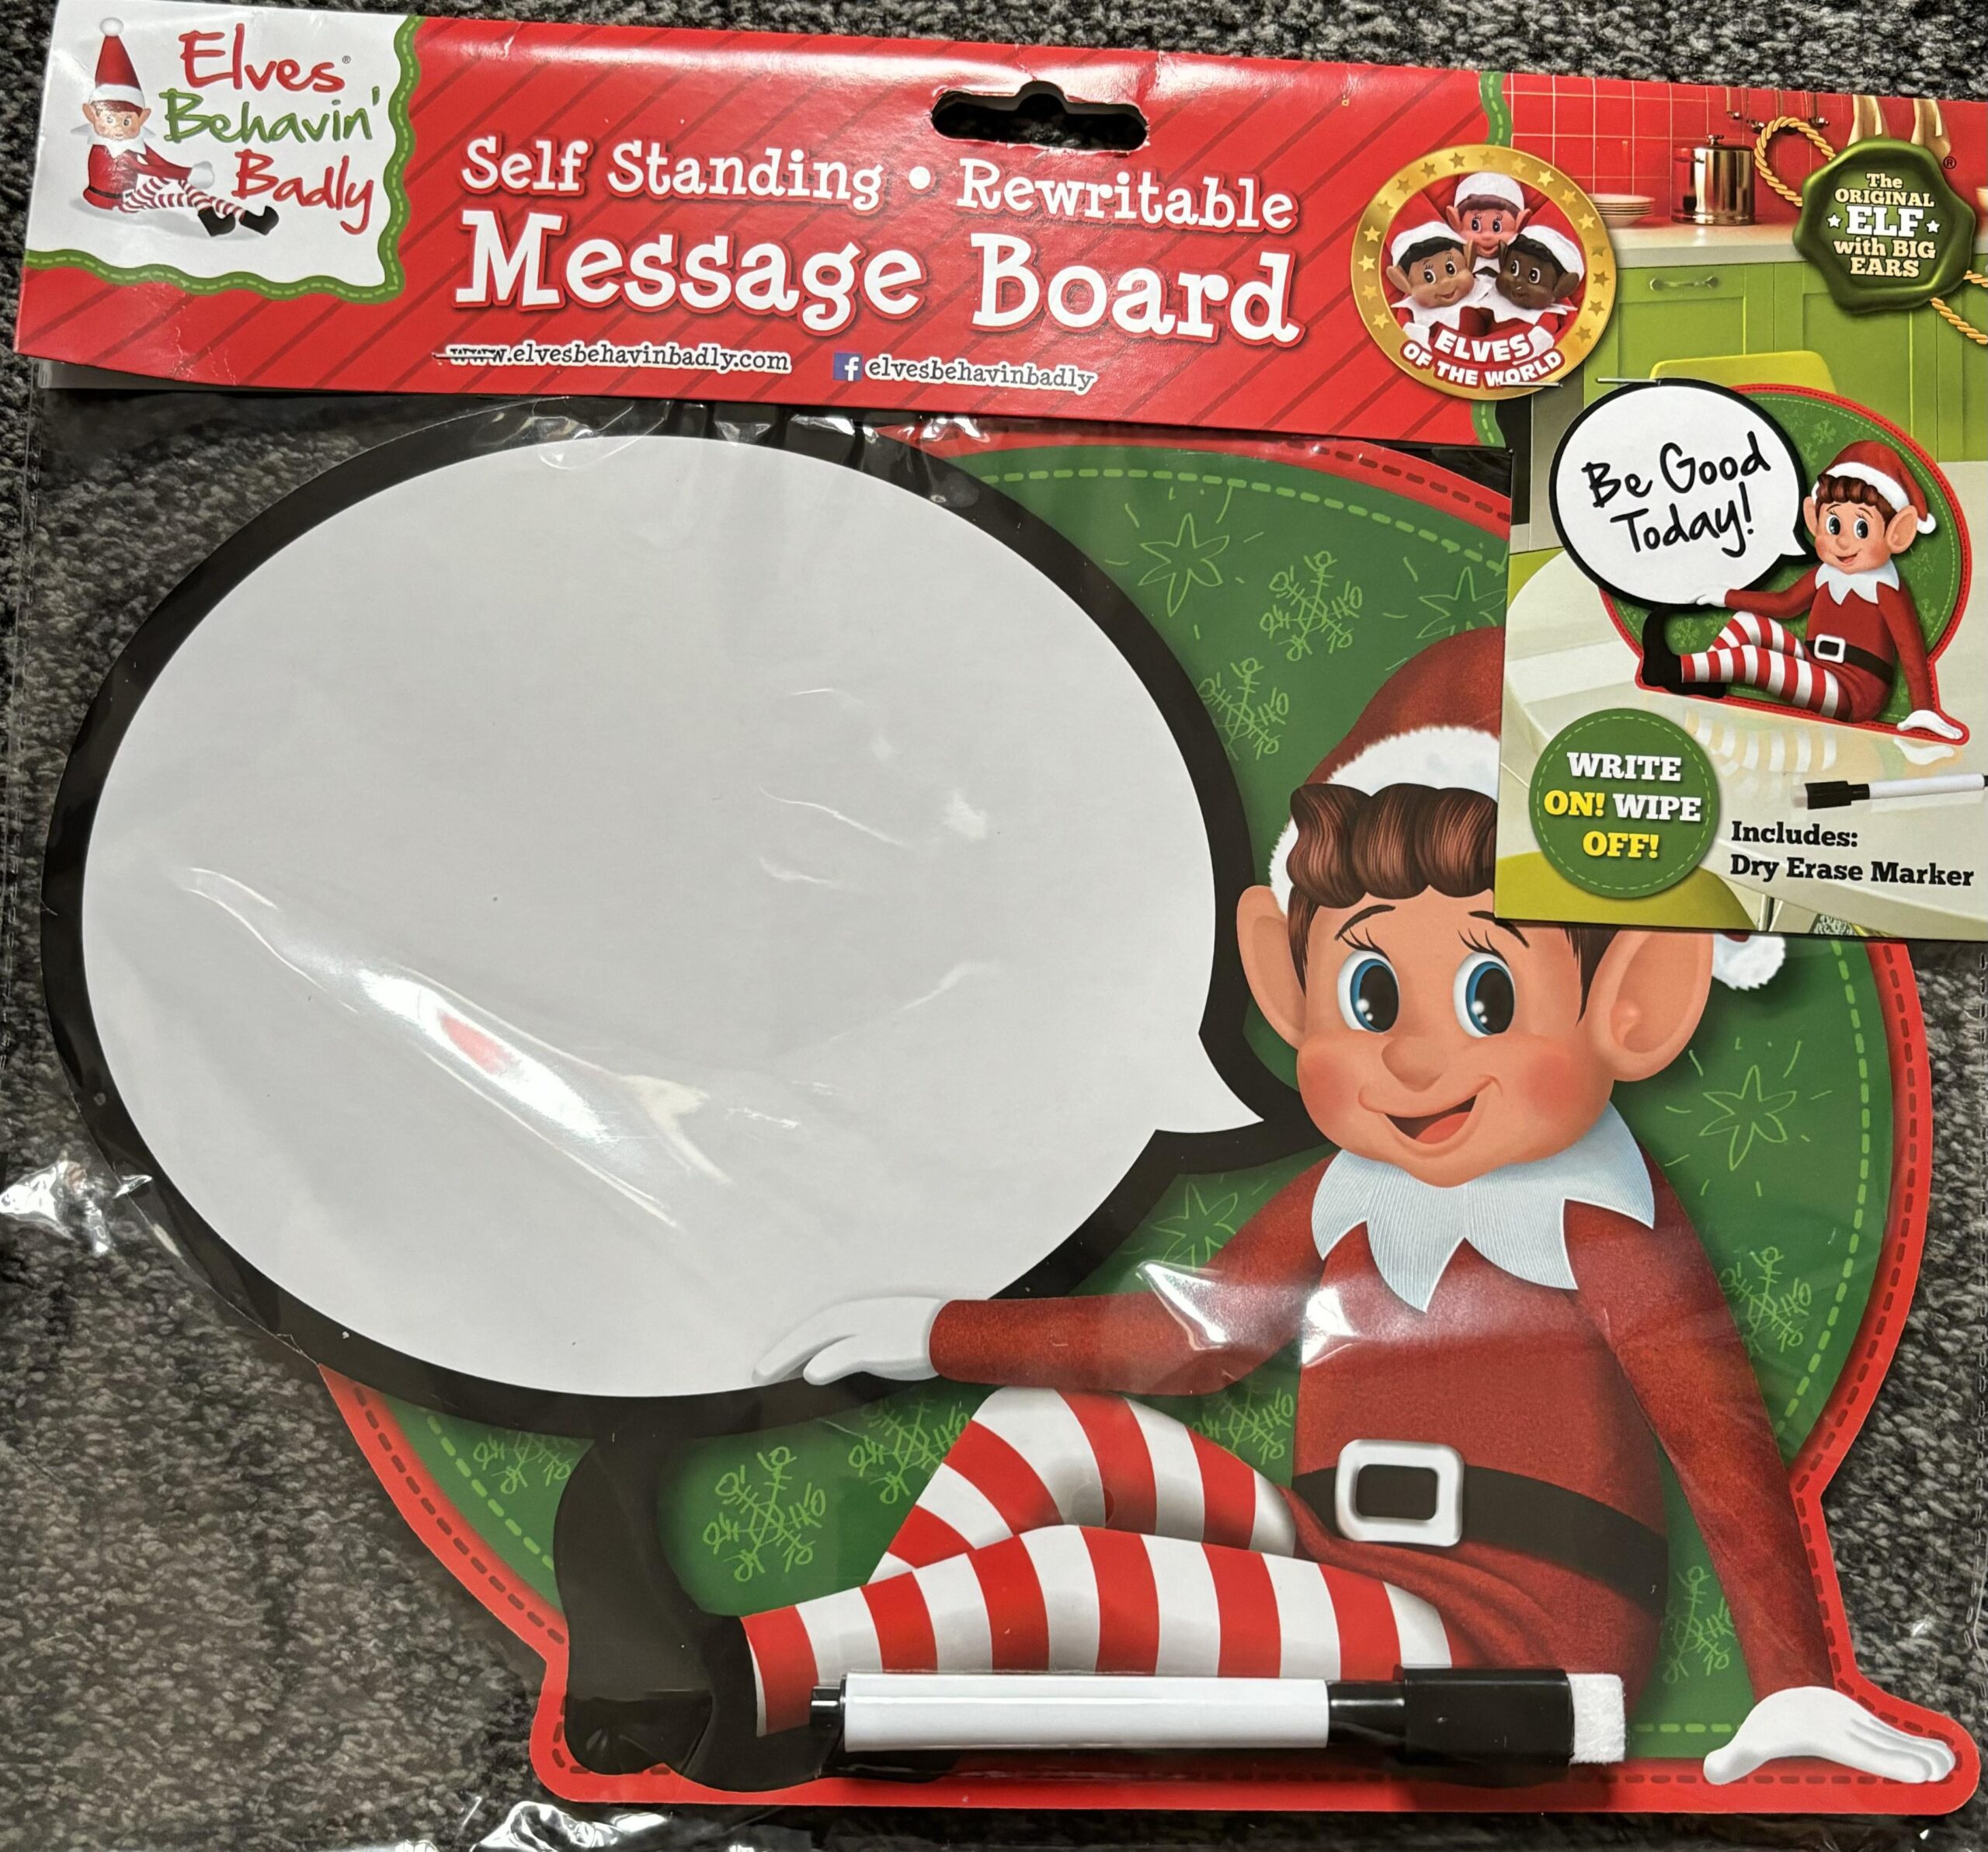 Win an Elf on The Shelf Goodie pack from Chiang Mai Kids